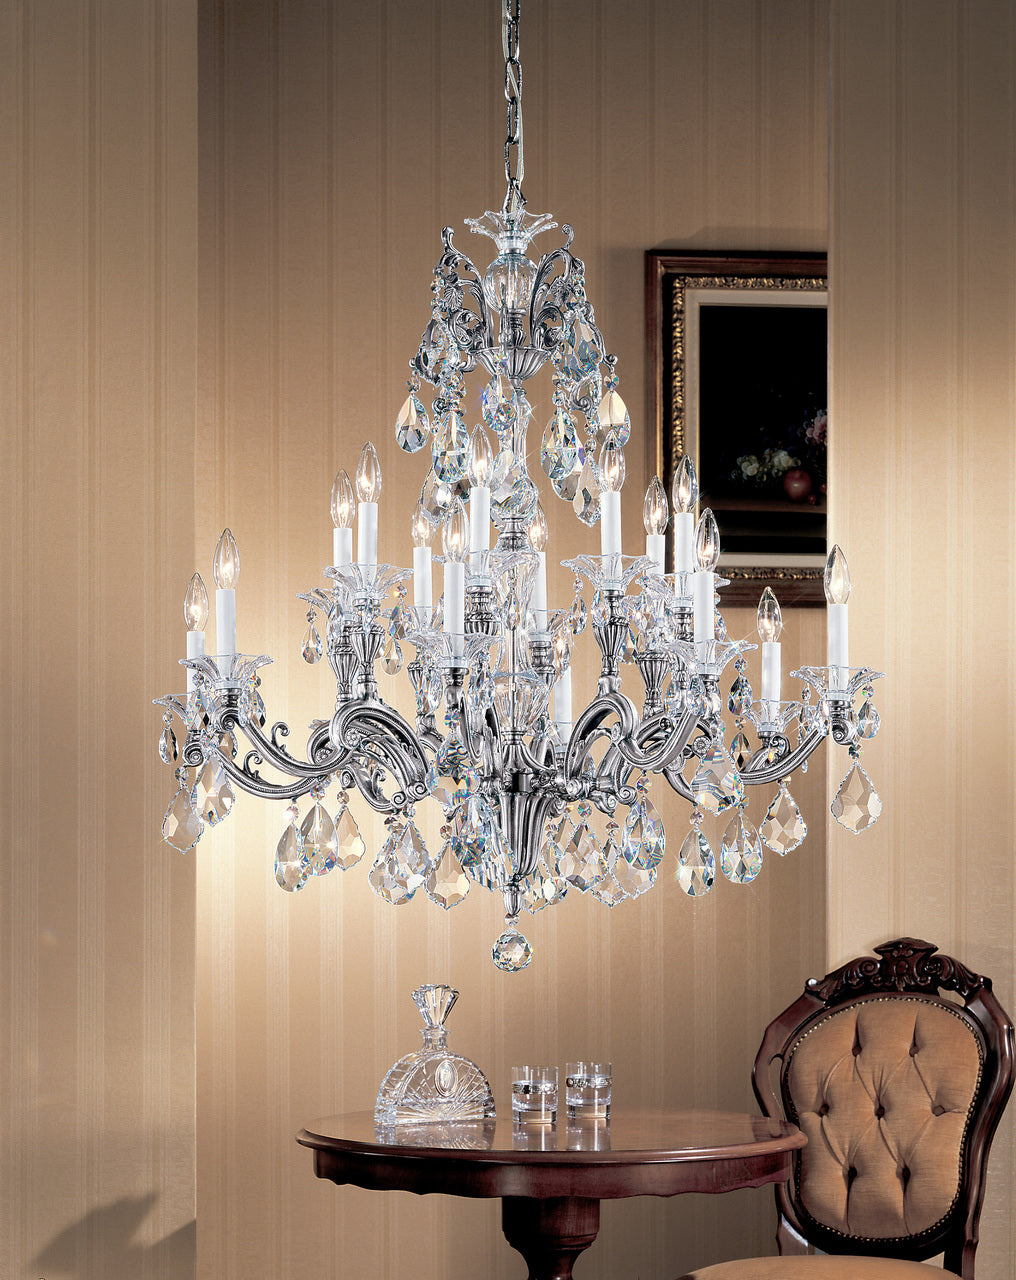 Classic Lighting 57116 MS S Via Firenze Crystal Chandelier in Millennium Silver (Imported from Spain)